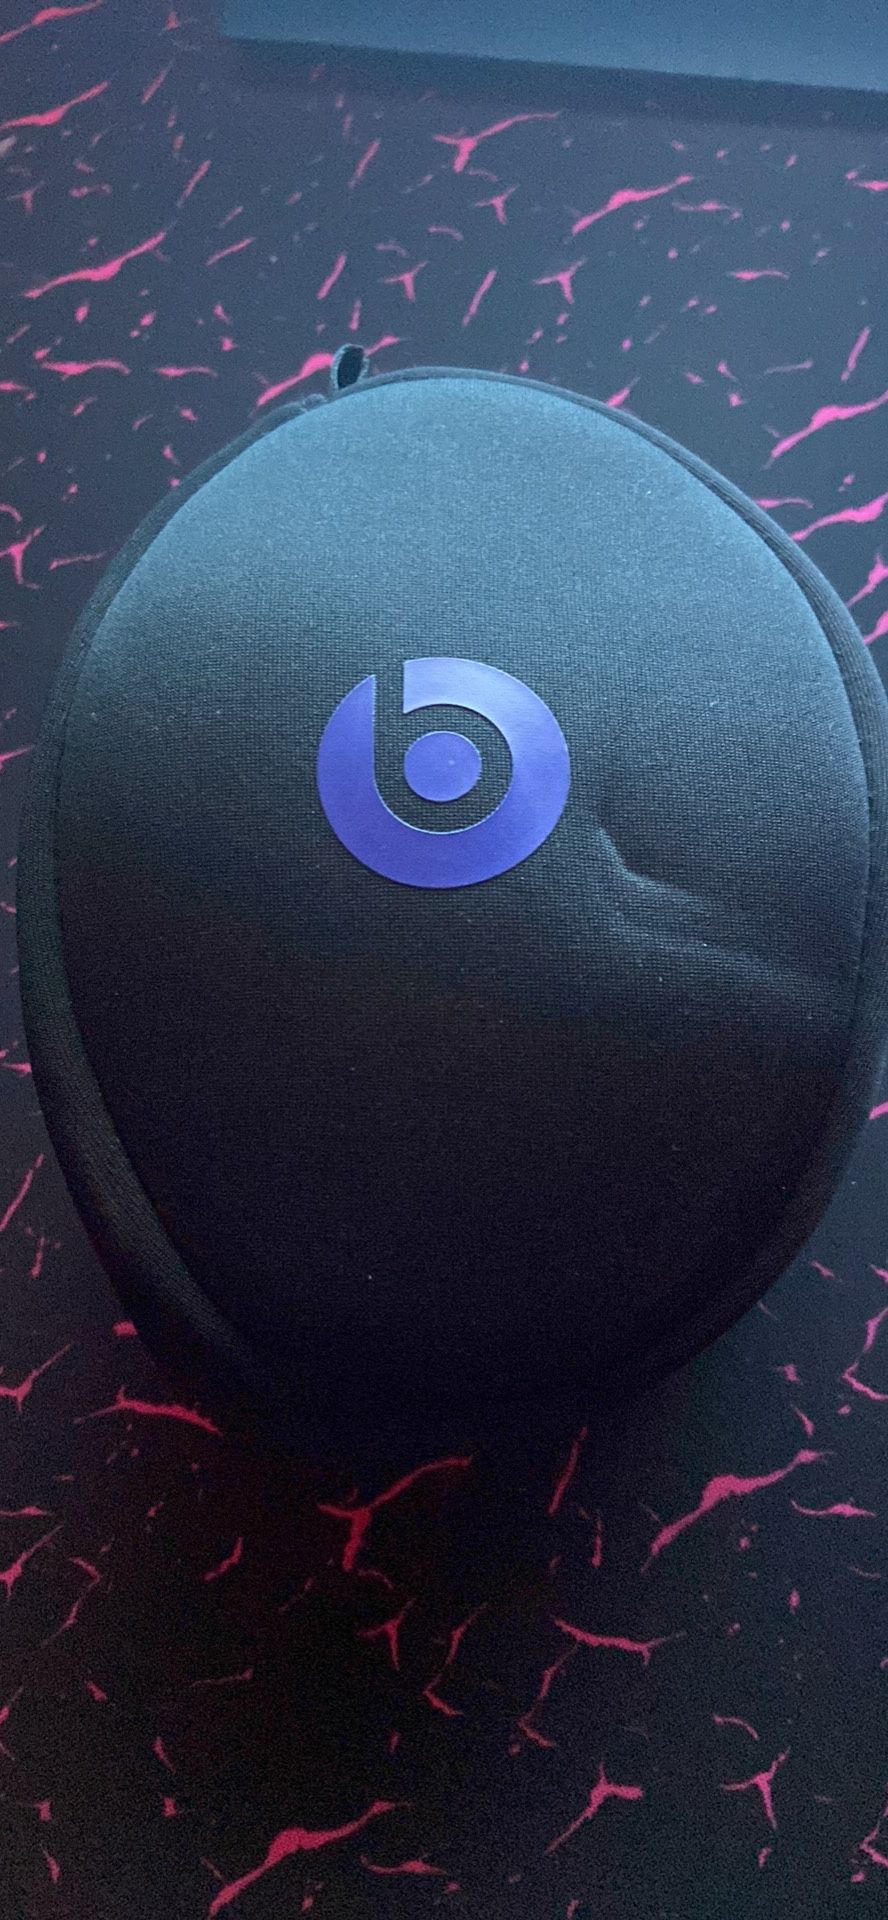 *Best Offer* Beats Solo 2 Wired Headphones